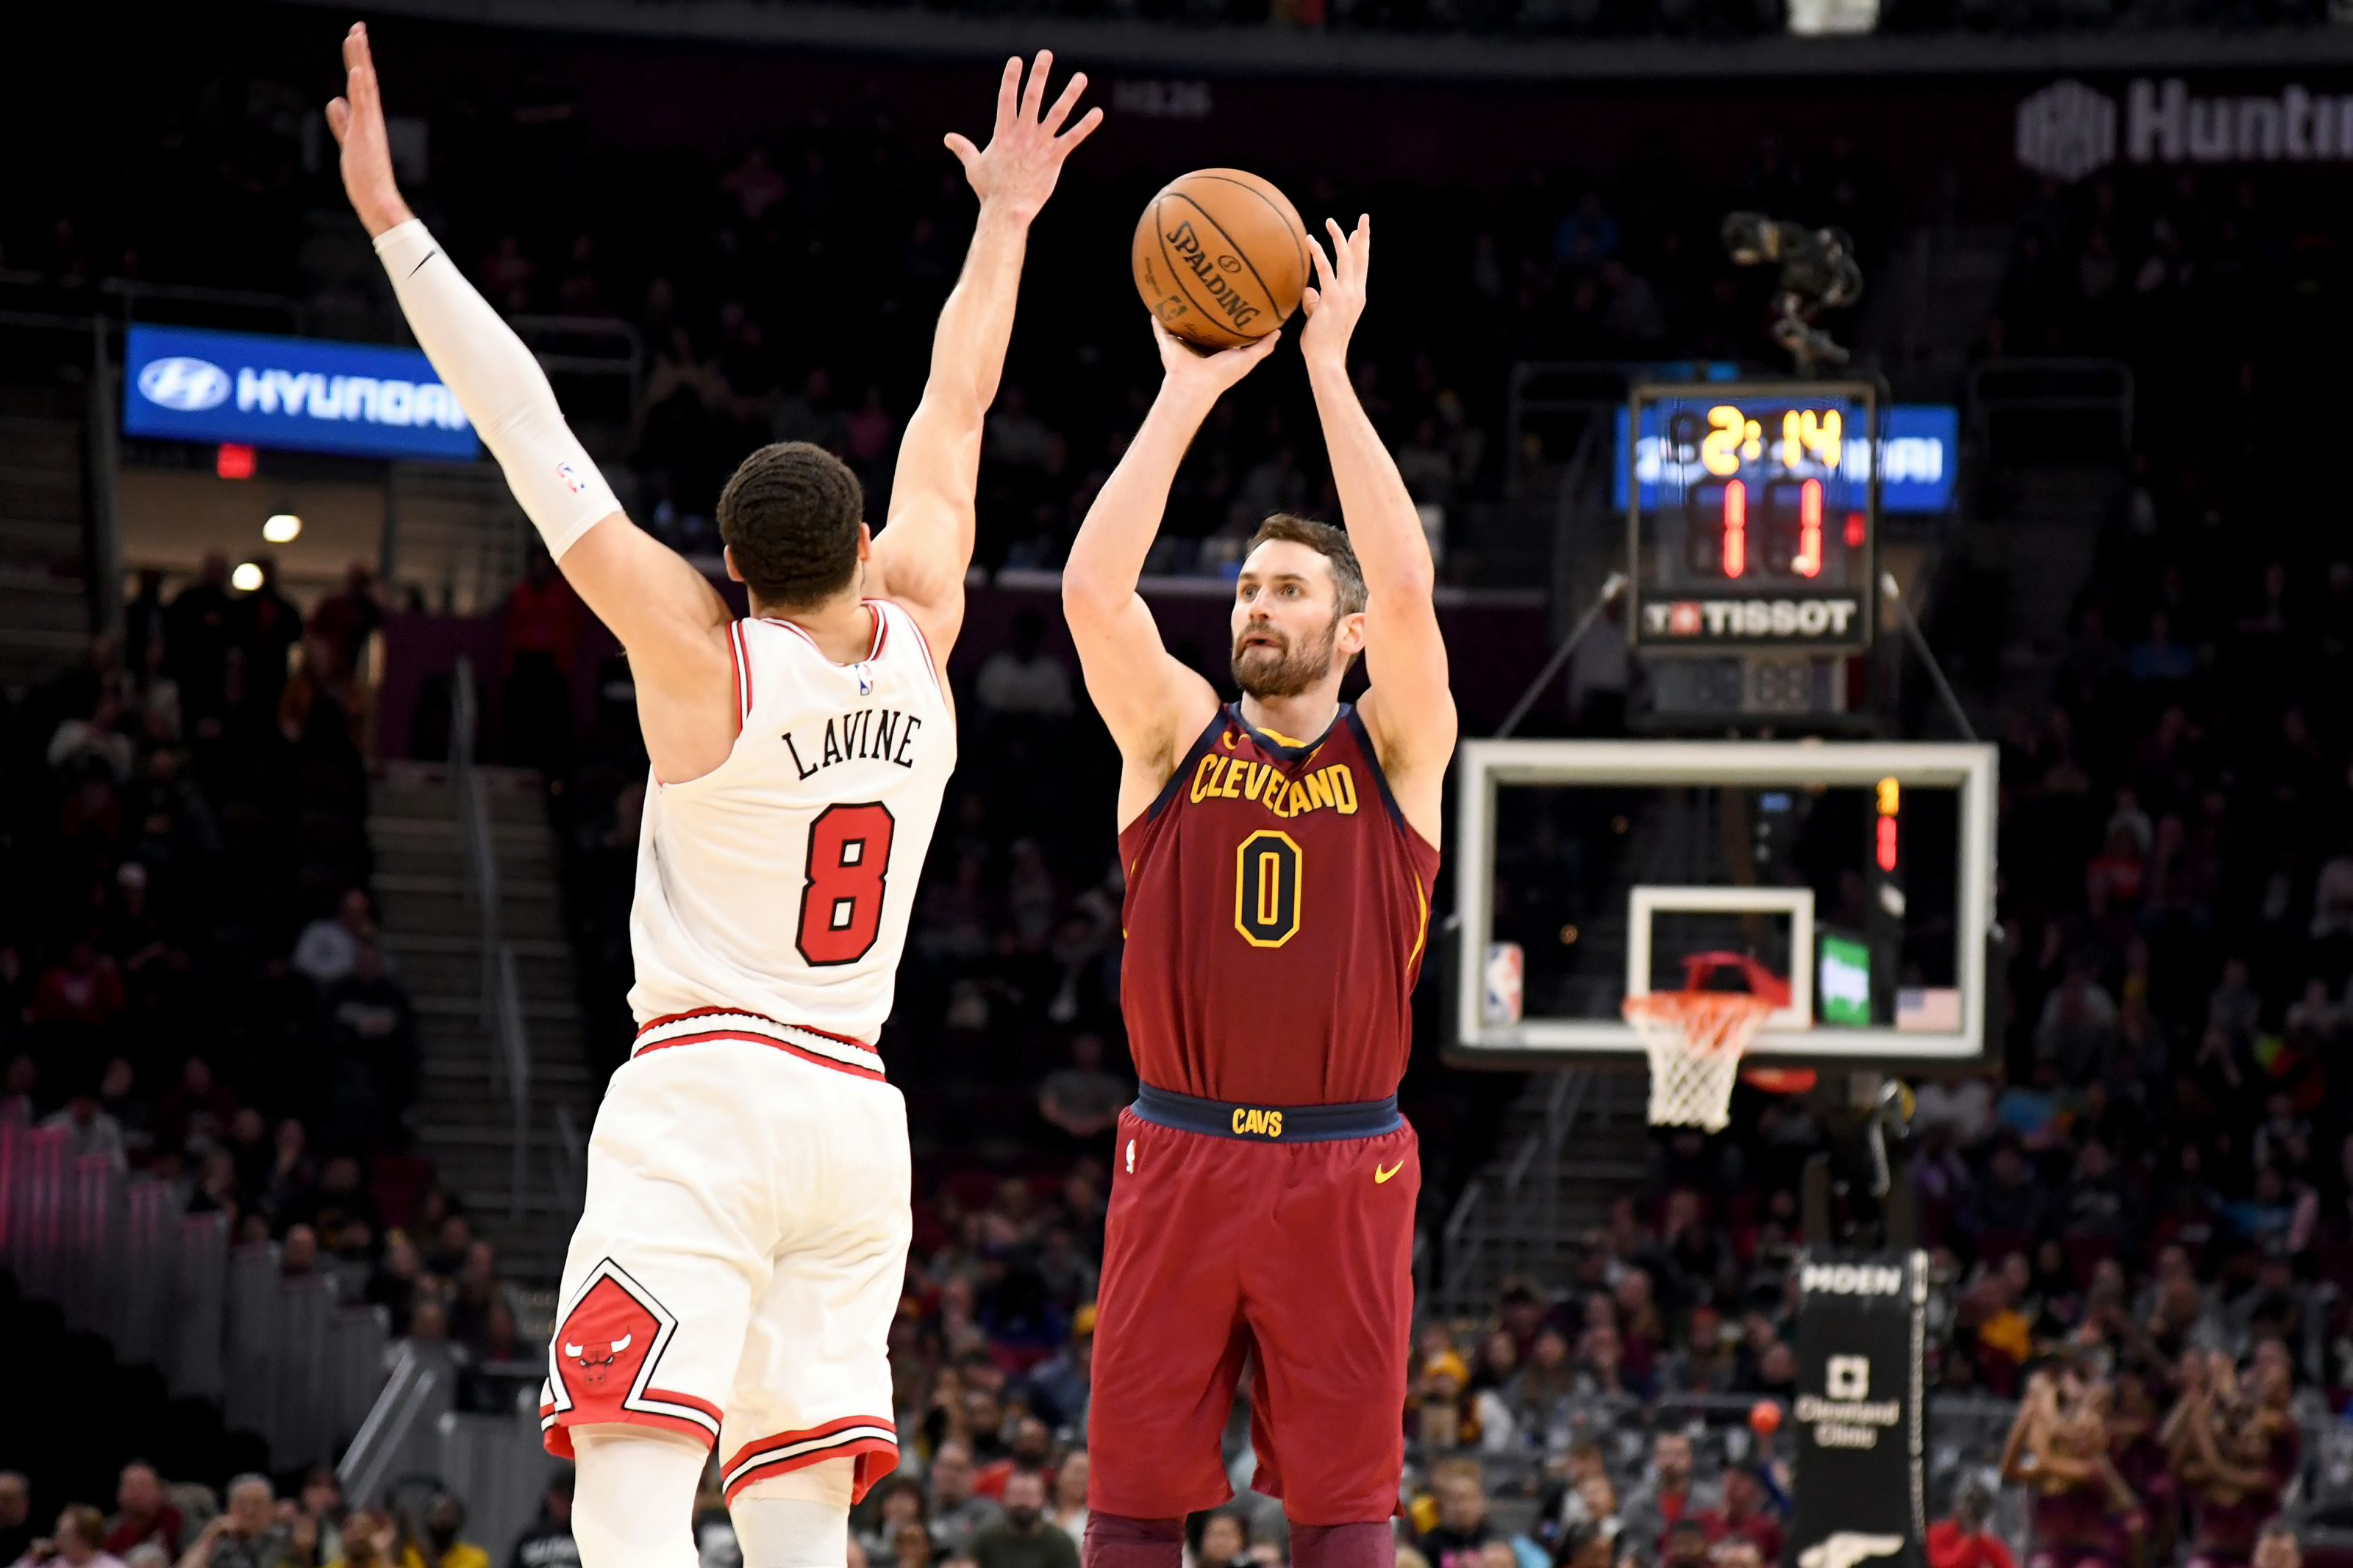 Cleveland Cavaliers: What should we expect from Kevin Love?